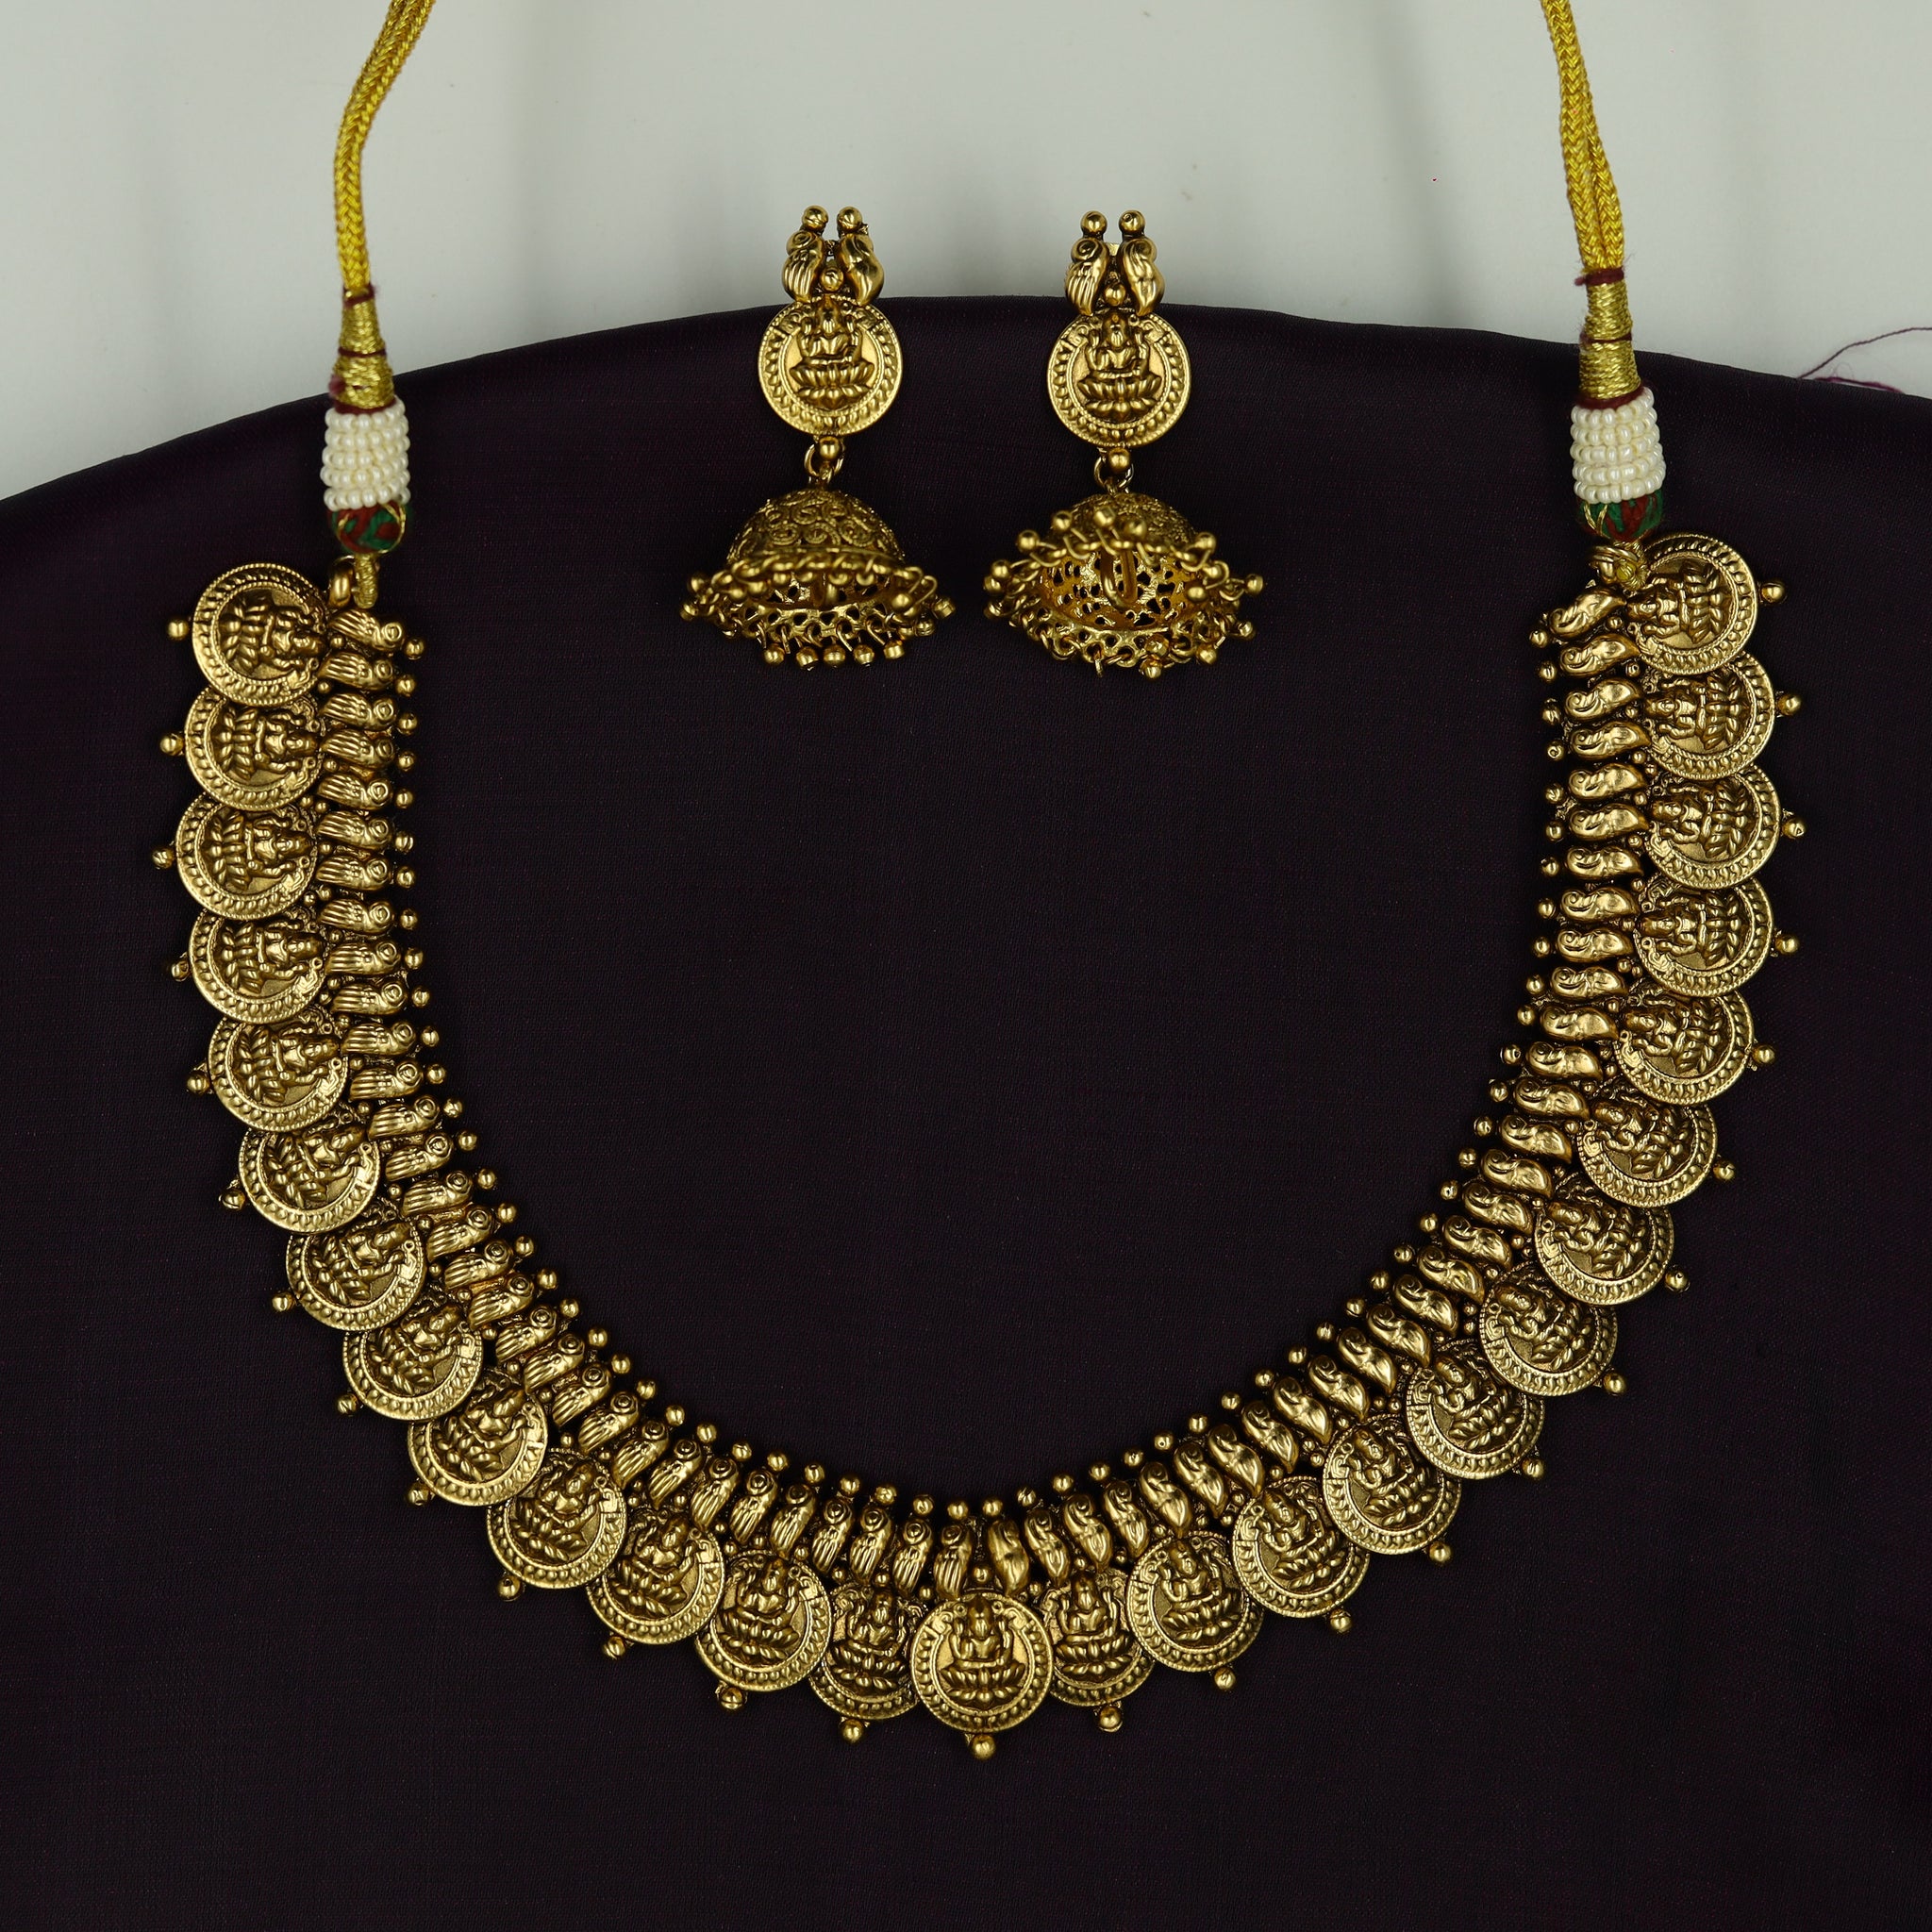 Antique Gold Plated Round Neck Temple Necklace Set 9974-28